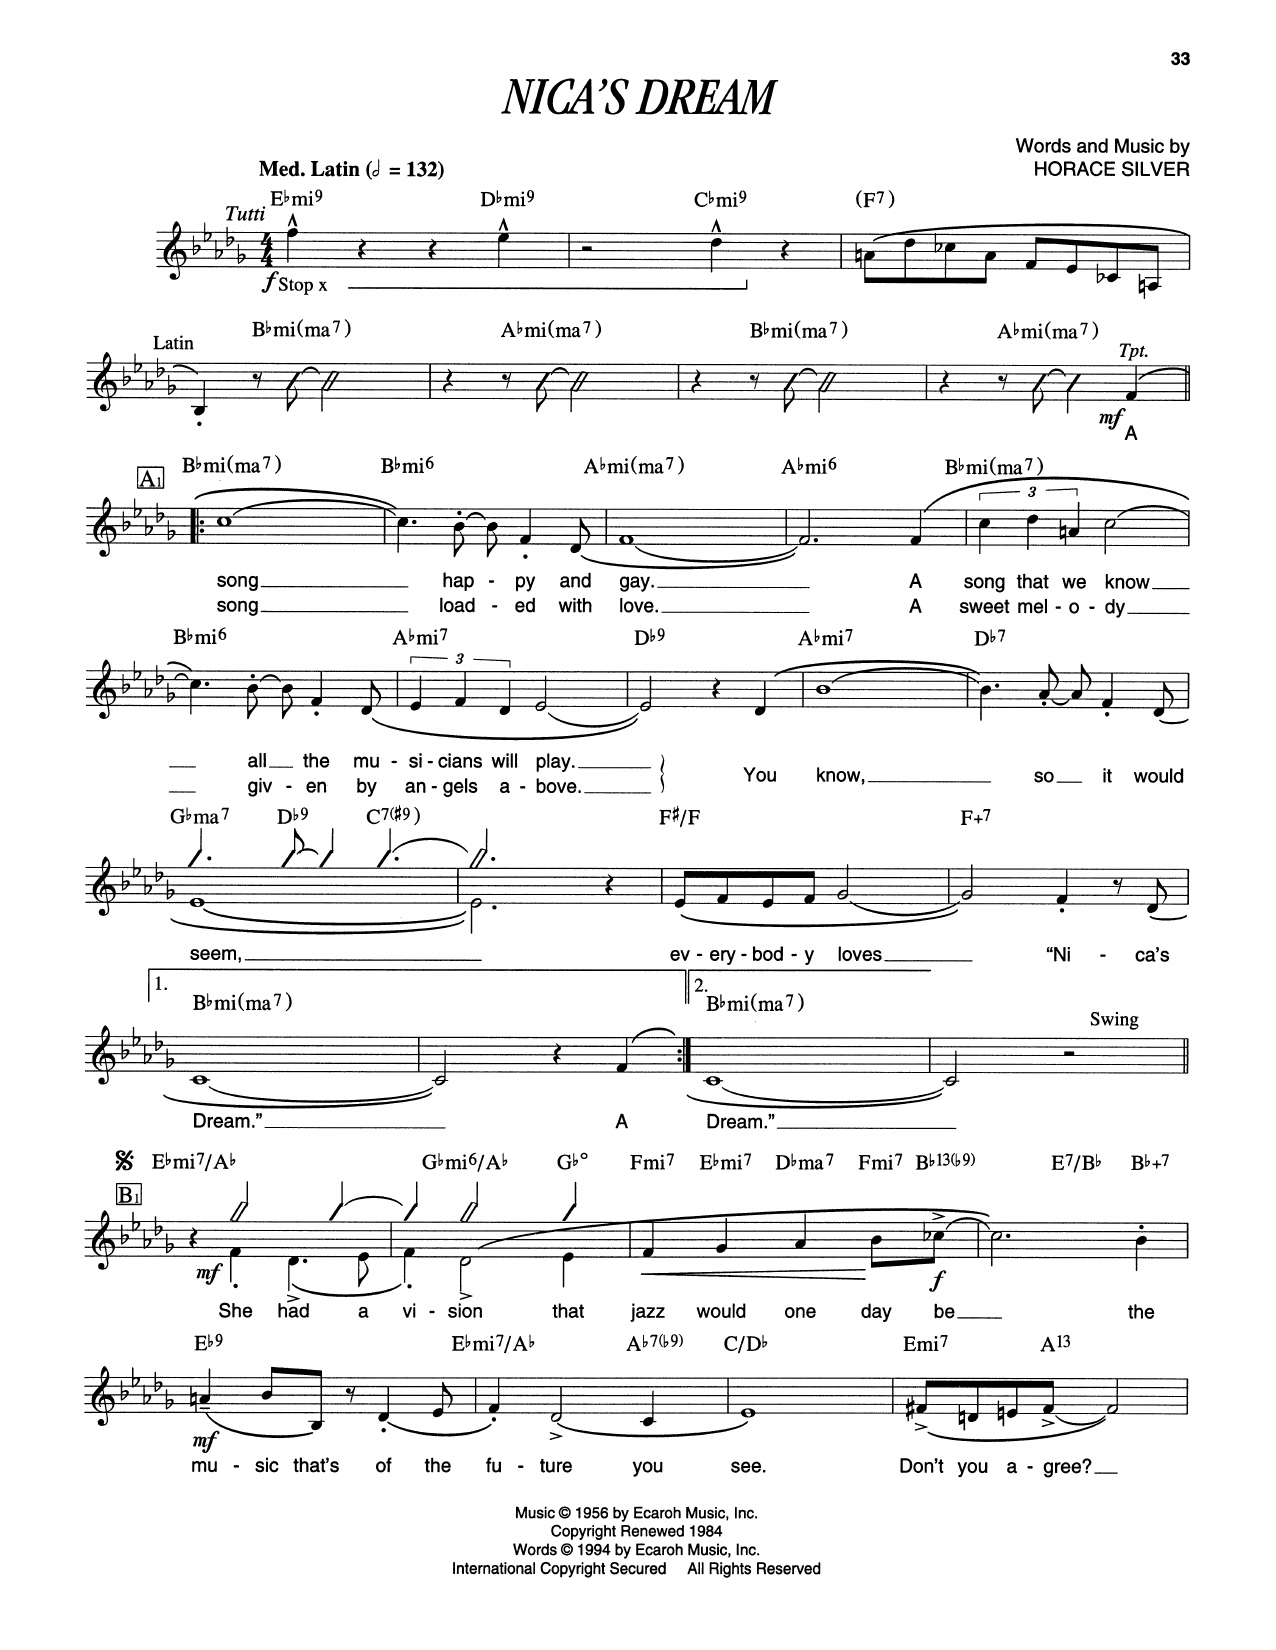 Download Horace Silver Nica's Dream Sheet Music